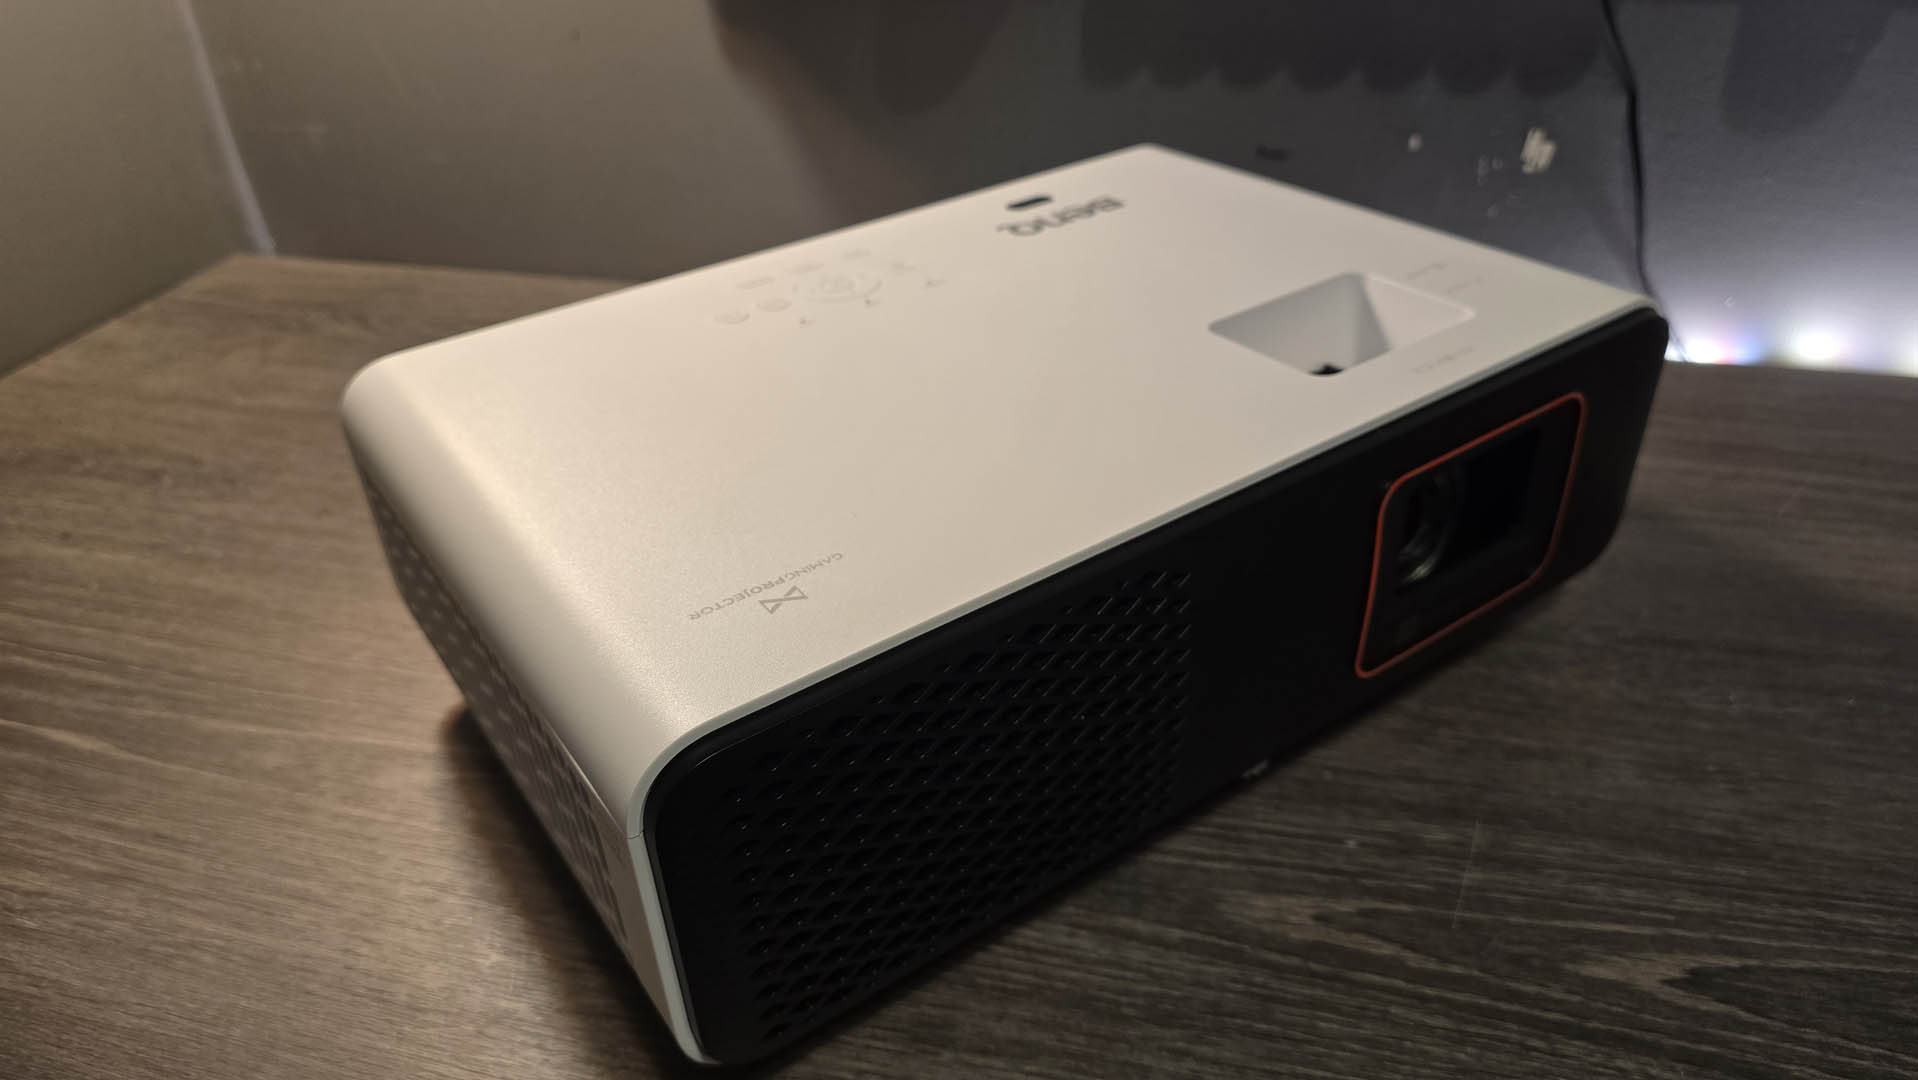 The BenQ X500i gaming projector on a gray tabletop